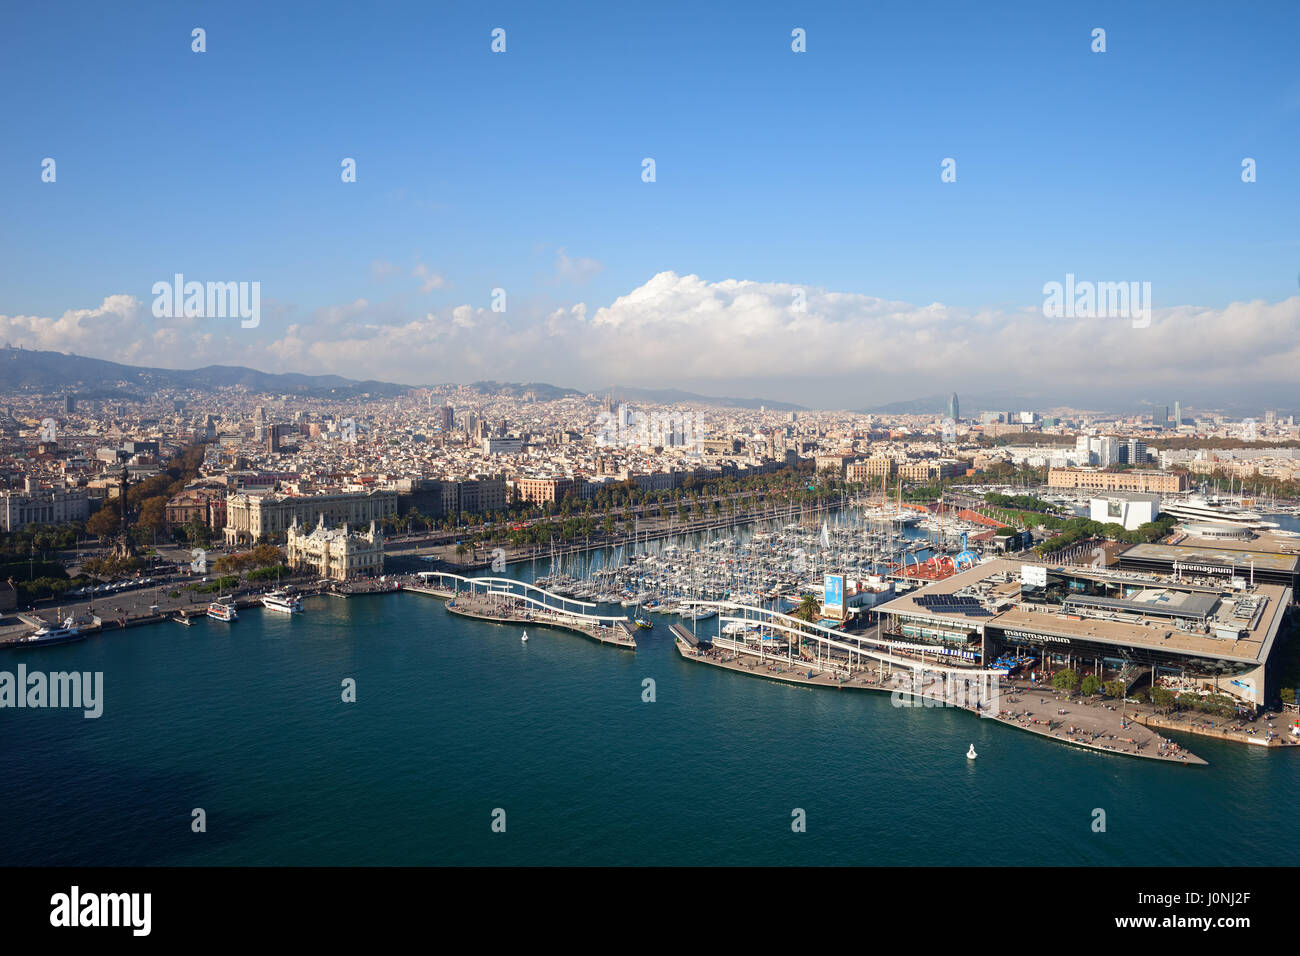 City of Barcelona aerial view in Catalonia, Spain, cityscape with Port Vell marina, Rambla de Mar, Maremagnum shopping centre. Stock Photo